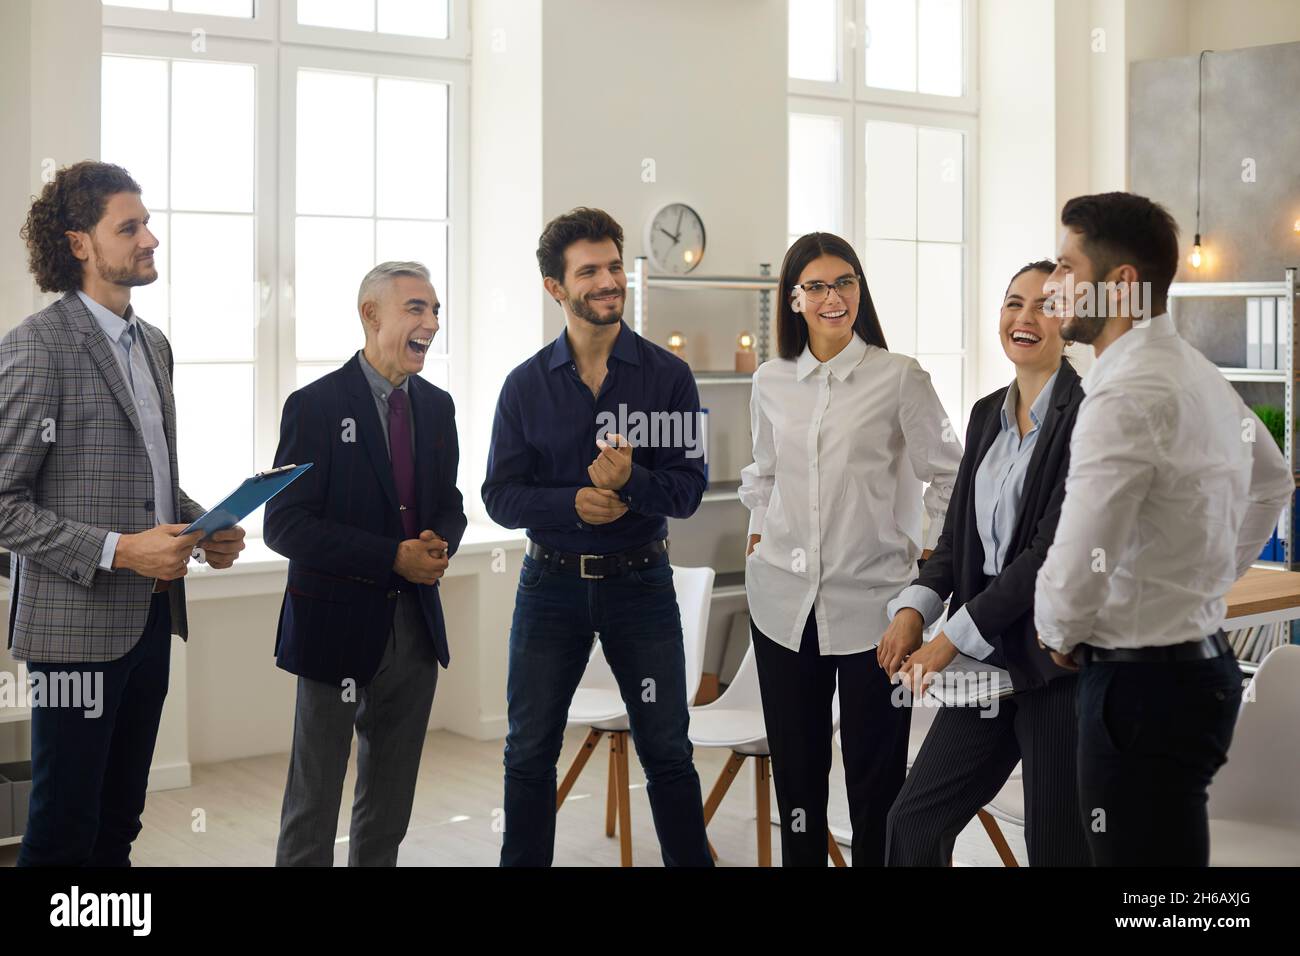 Happy young business team having a fun conversation with a mature manager in the office. Stock Photo